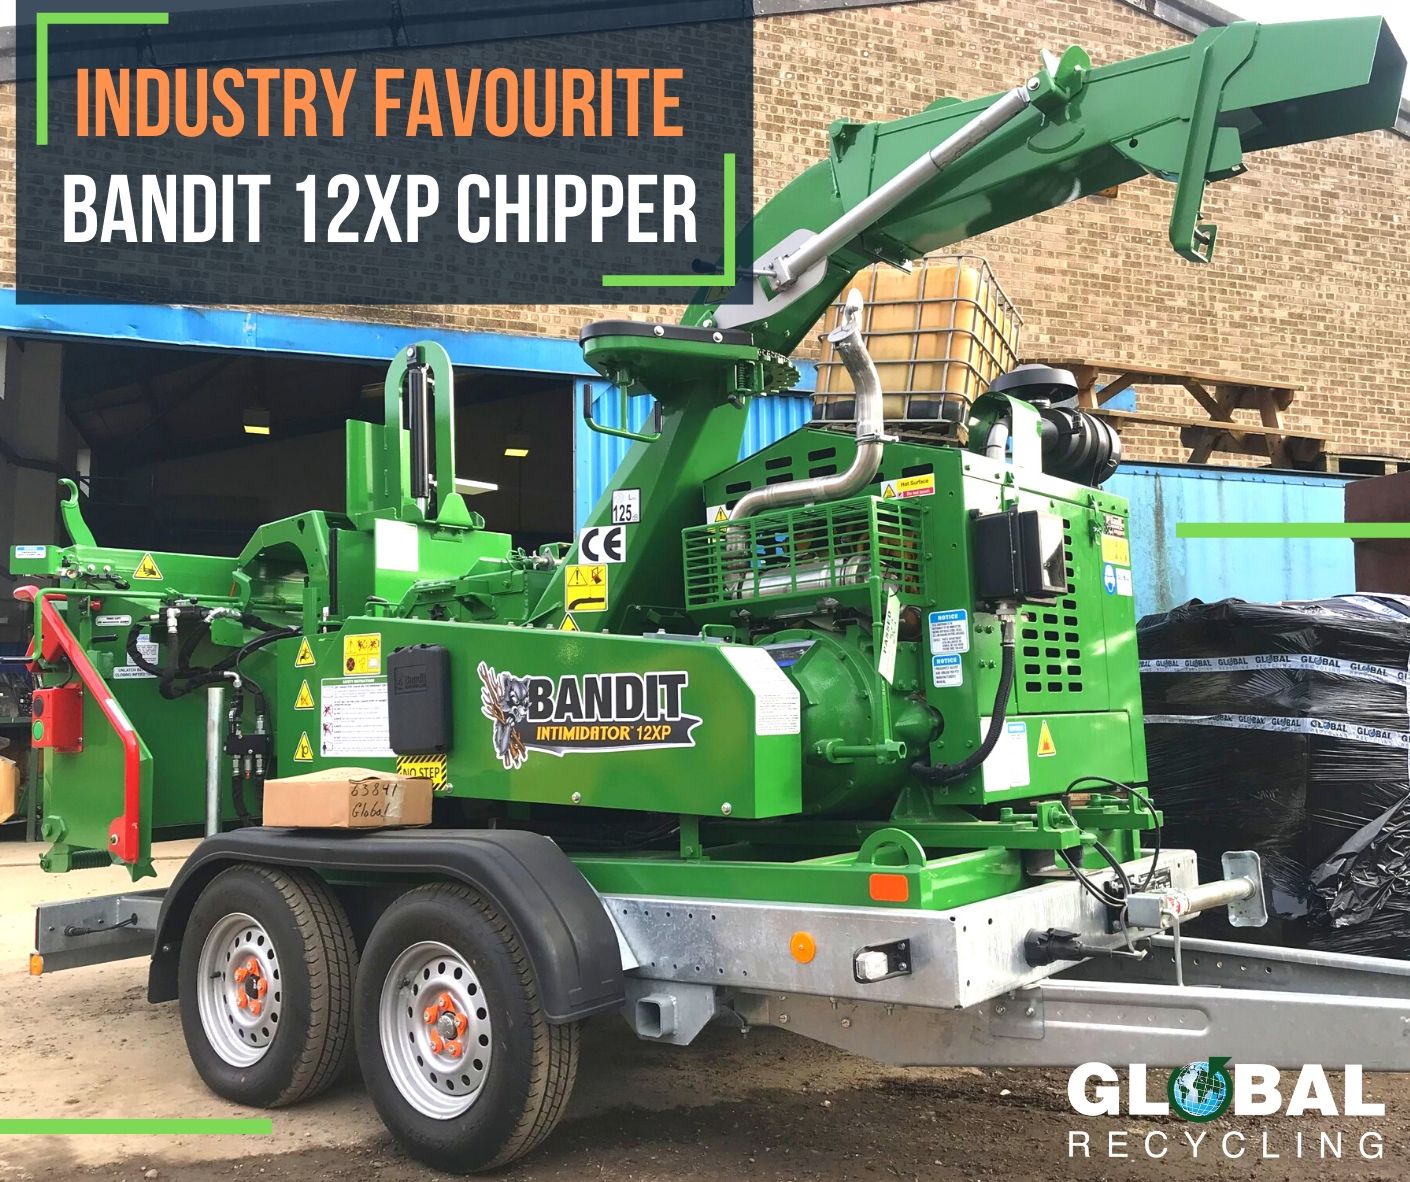 INDUSTRY FAVOURITE – the Bandit 12XP chipper!